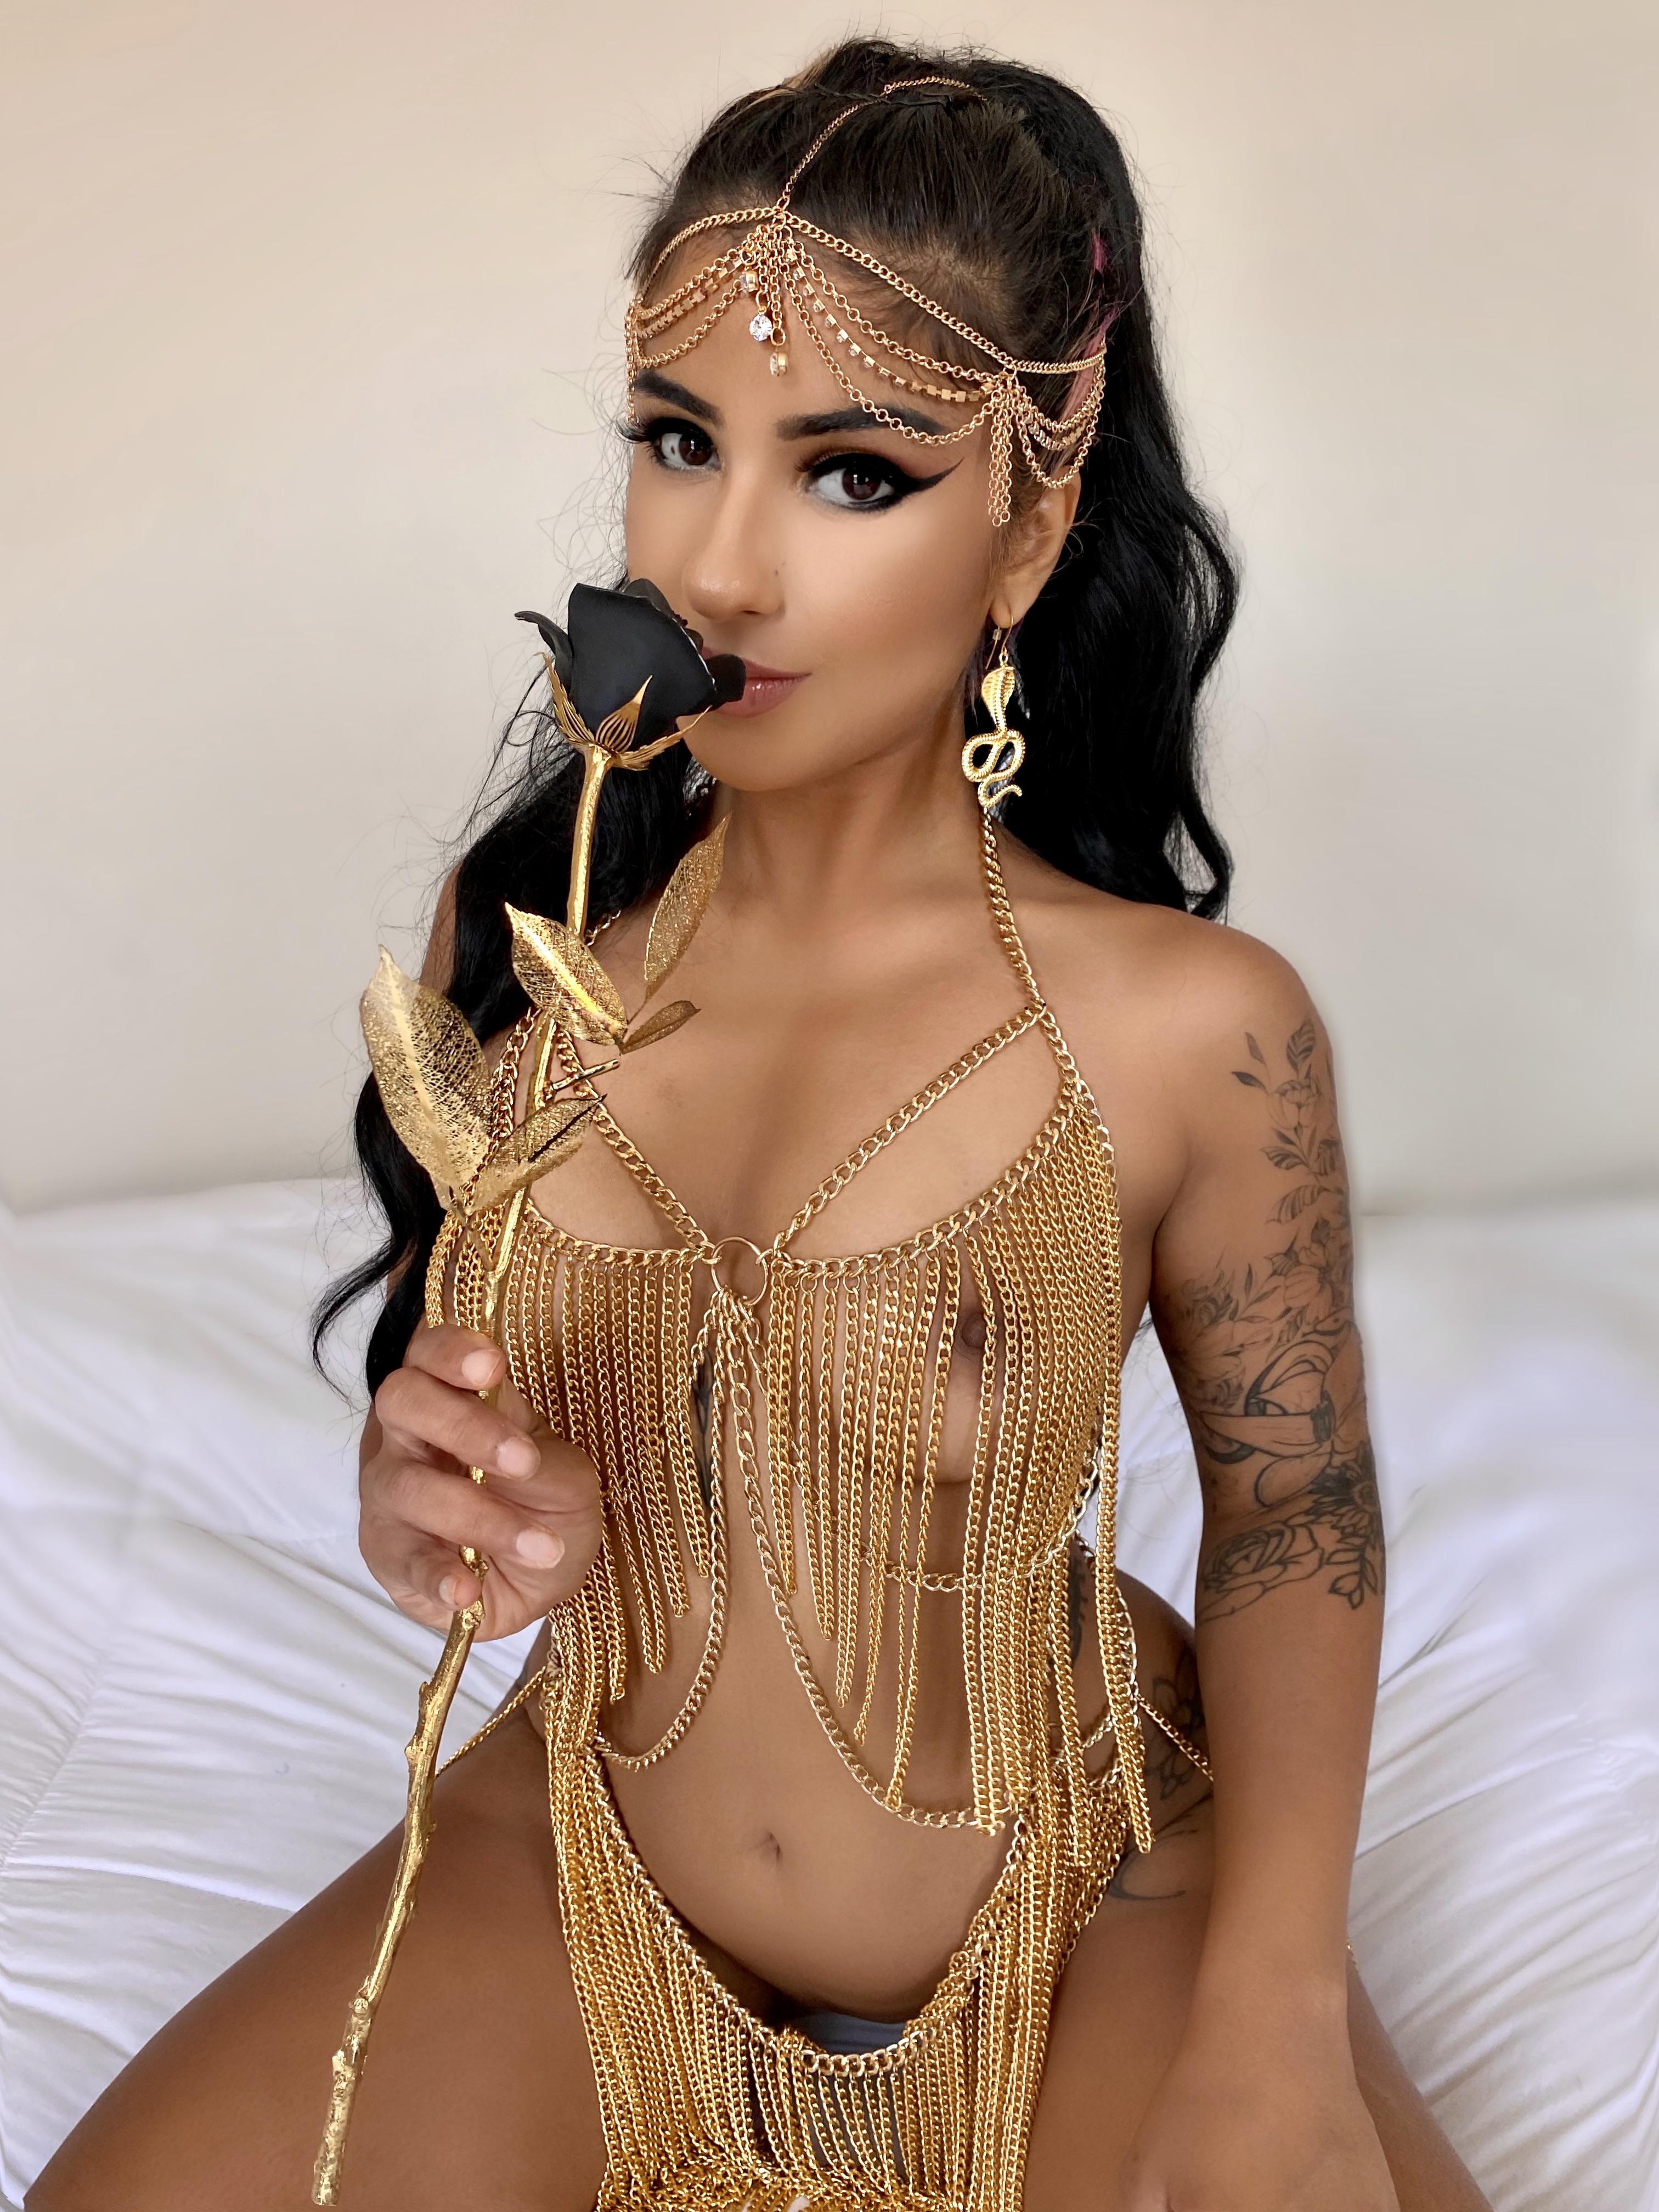 Can I be your Cleopatra fuckdoll? ?